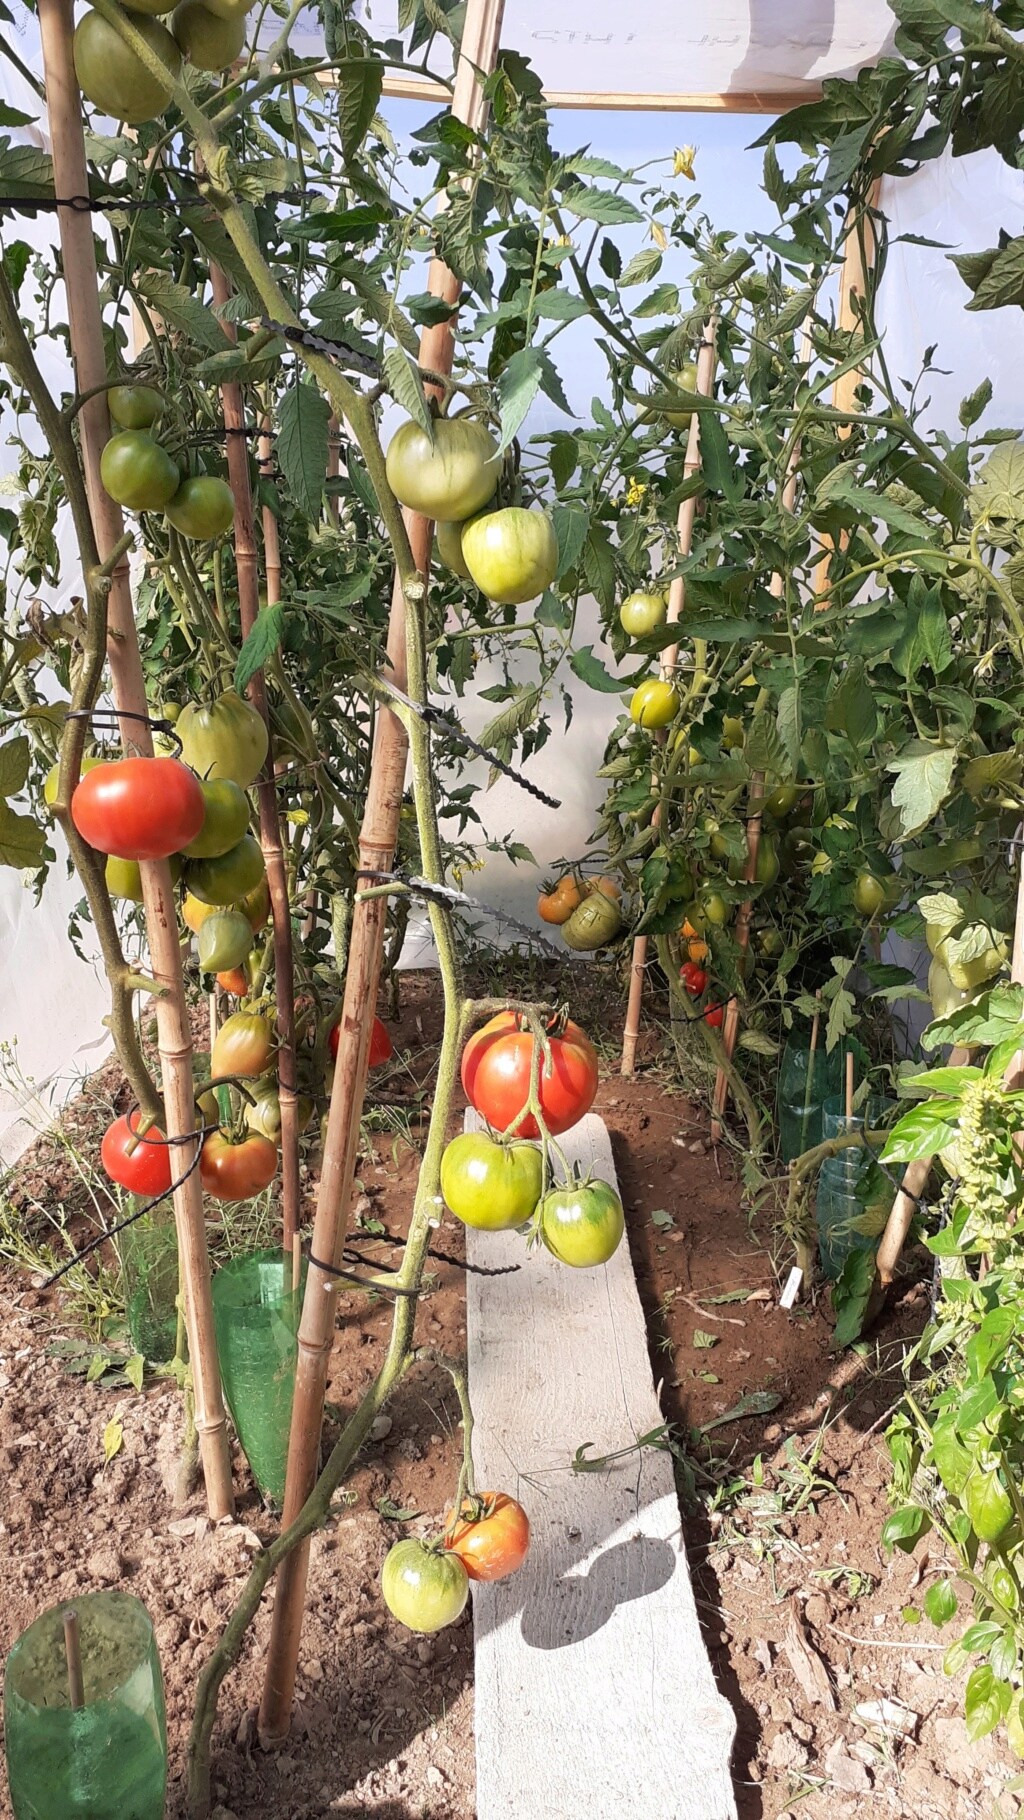 Tomates 2019 - 2020 - 2021 - 2022 - Page 4 20220815